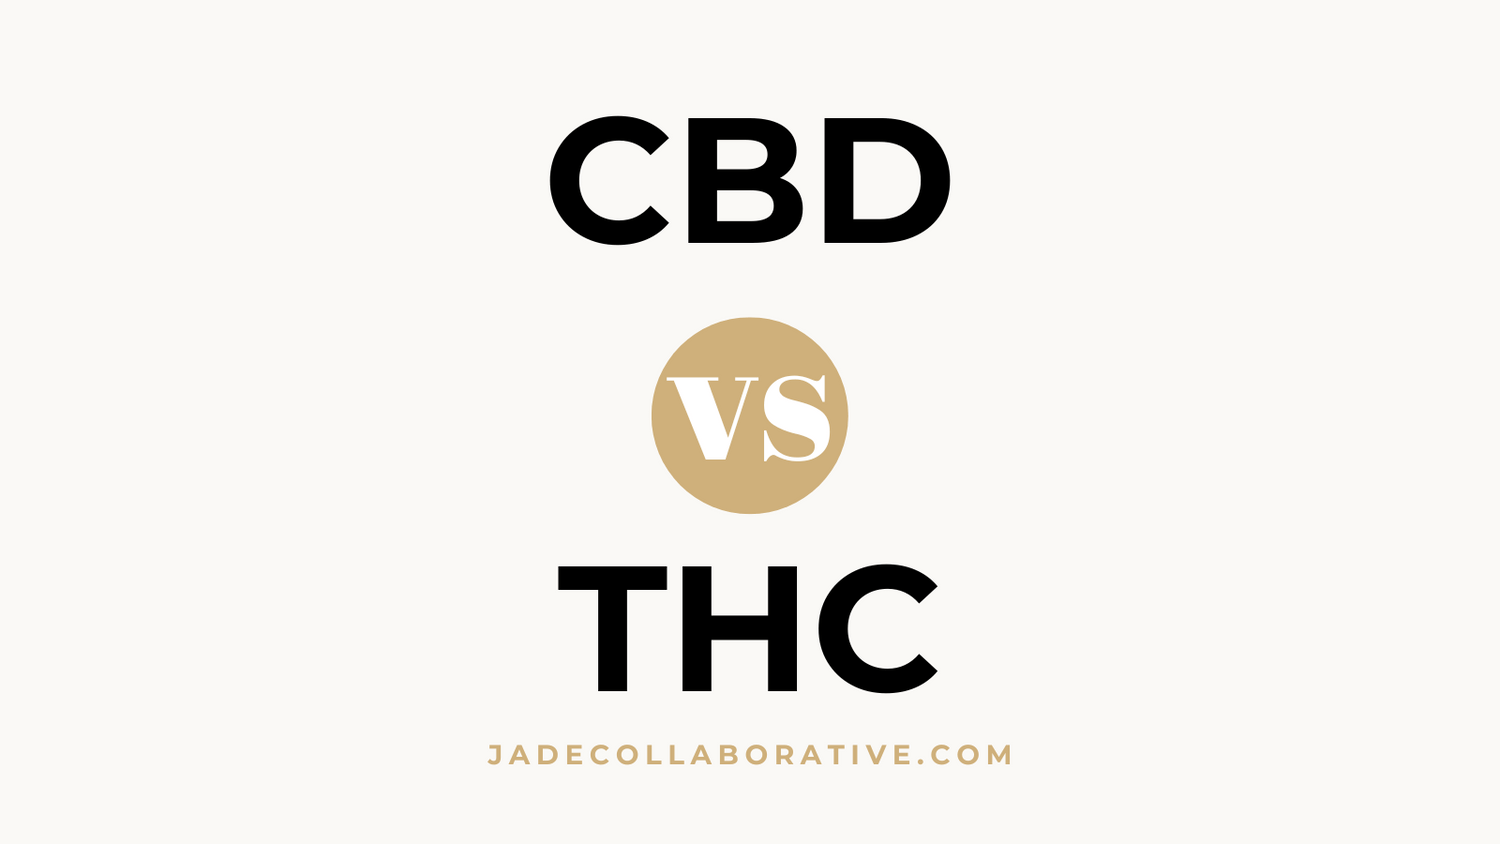 CBD vs THC What's the difference?